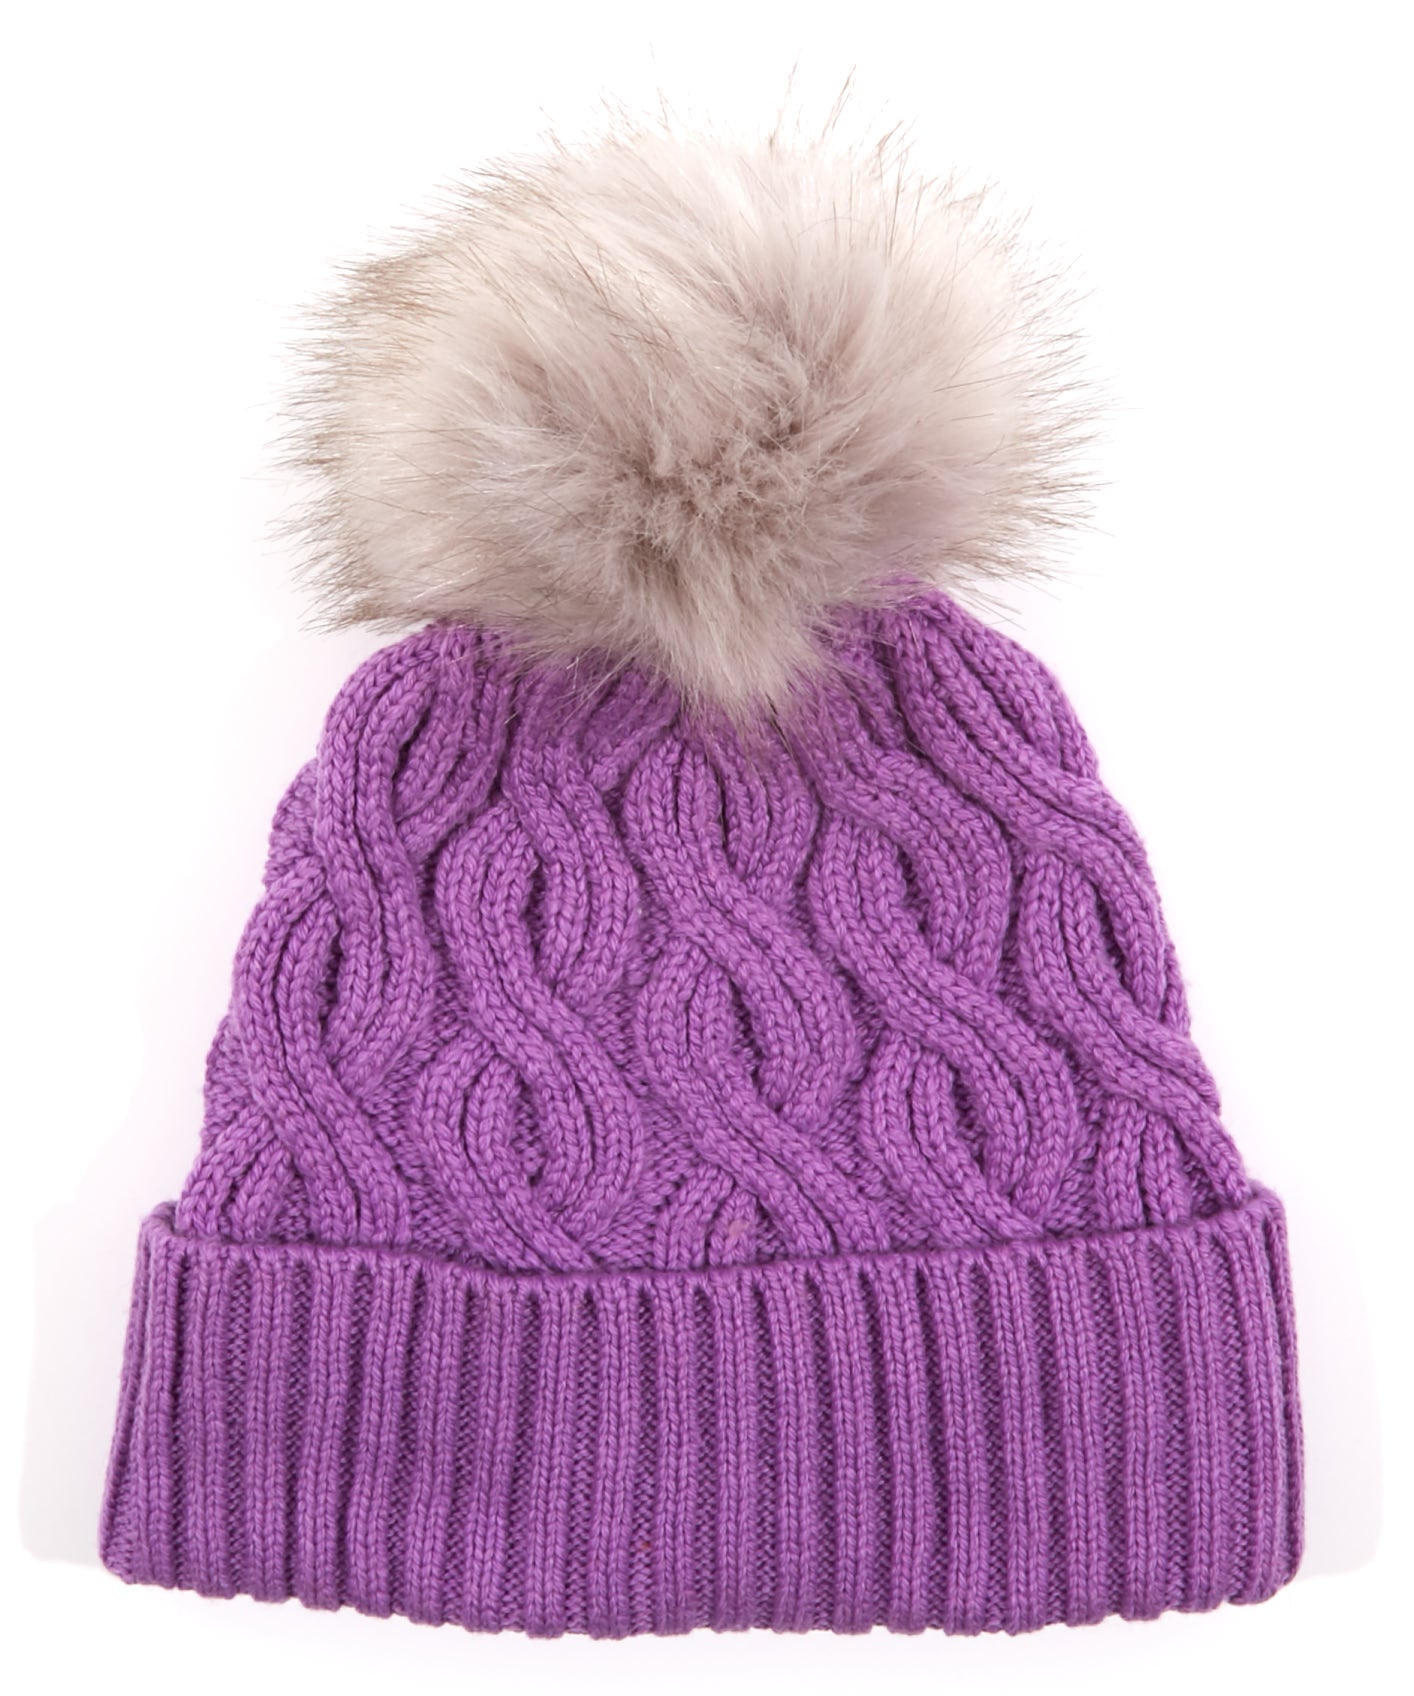 Recycled Pom Hat in color Amethyst